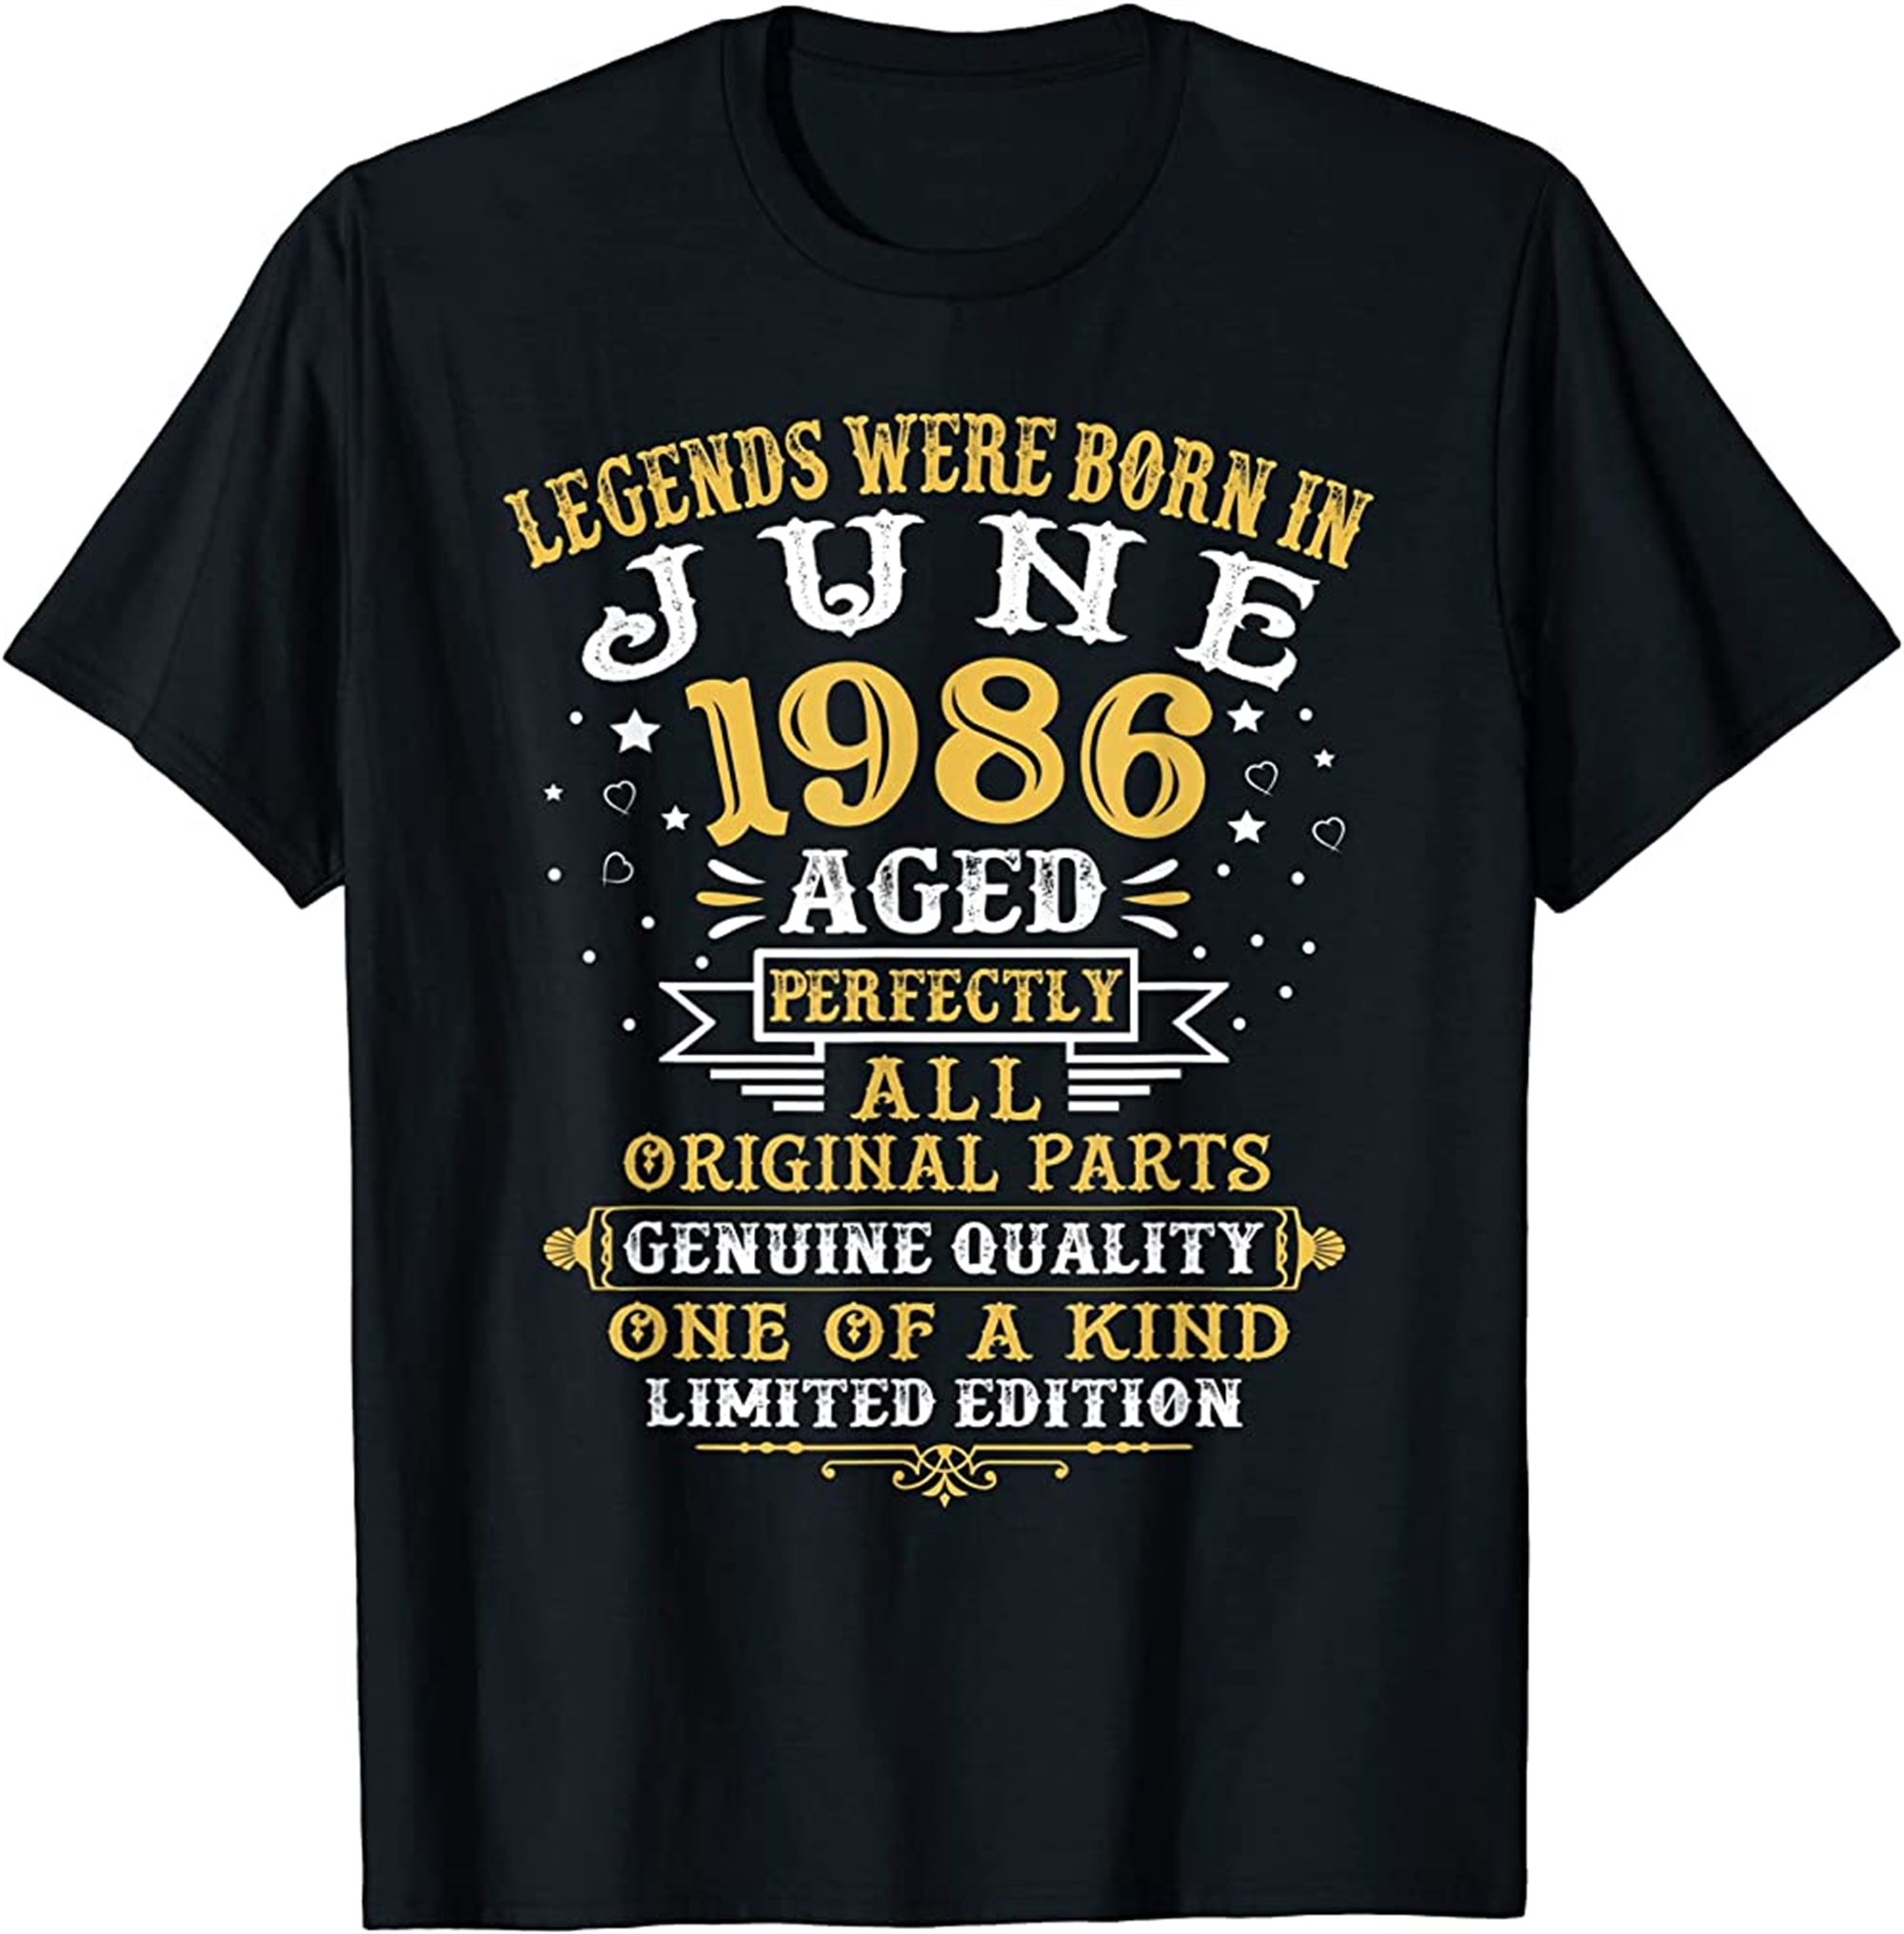 Legends Were Born In June 1986 36 Years Old 36th Birthday T-shirt Full Size Up To 5xl